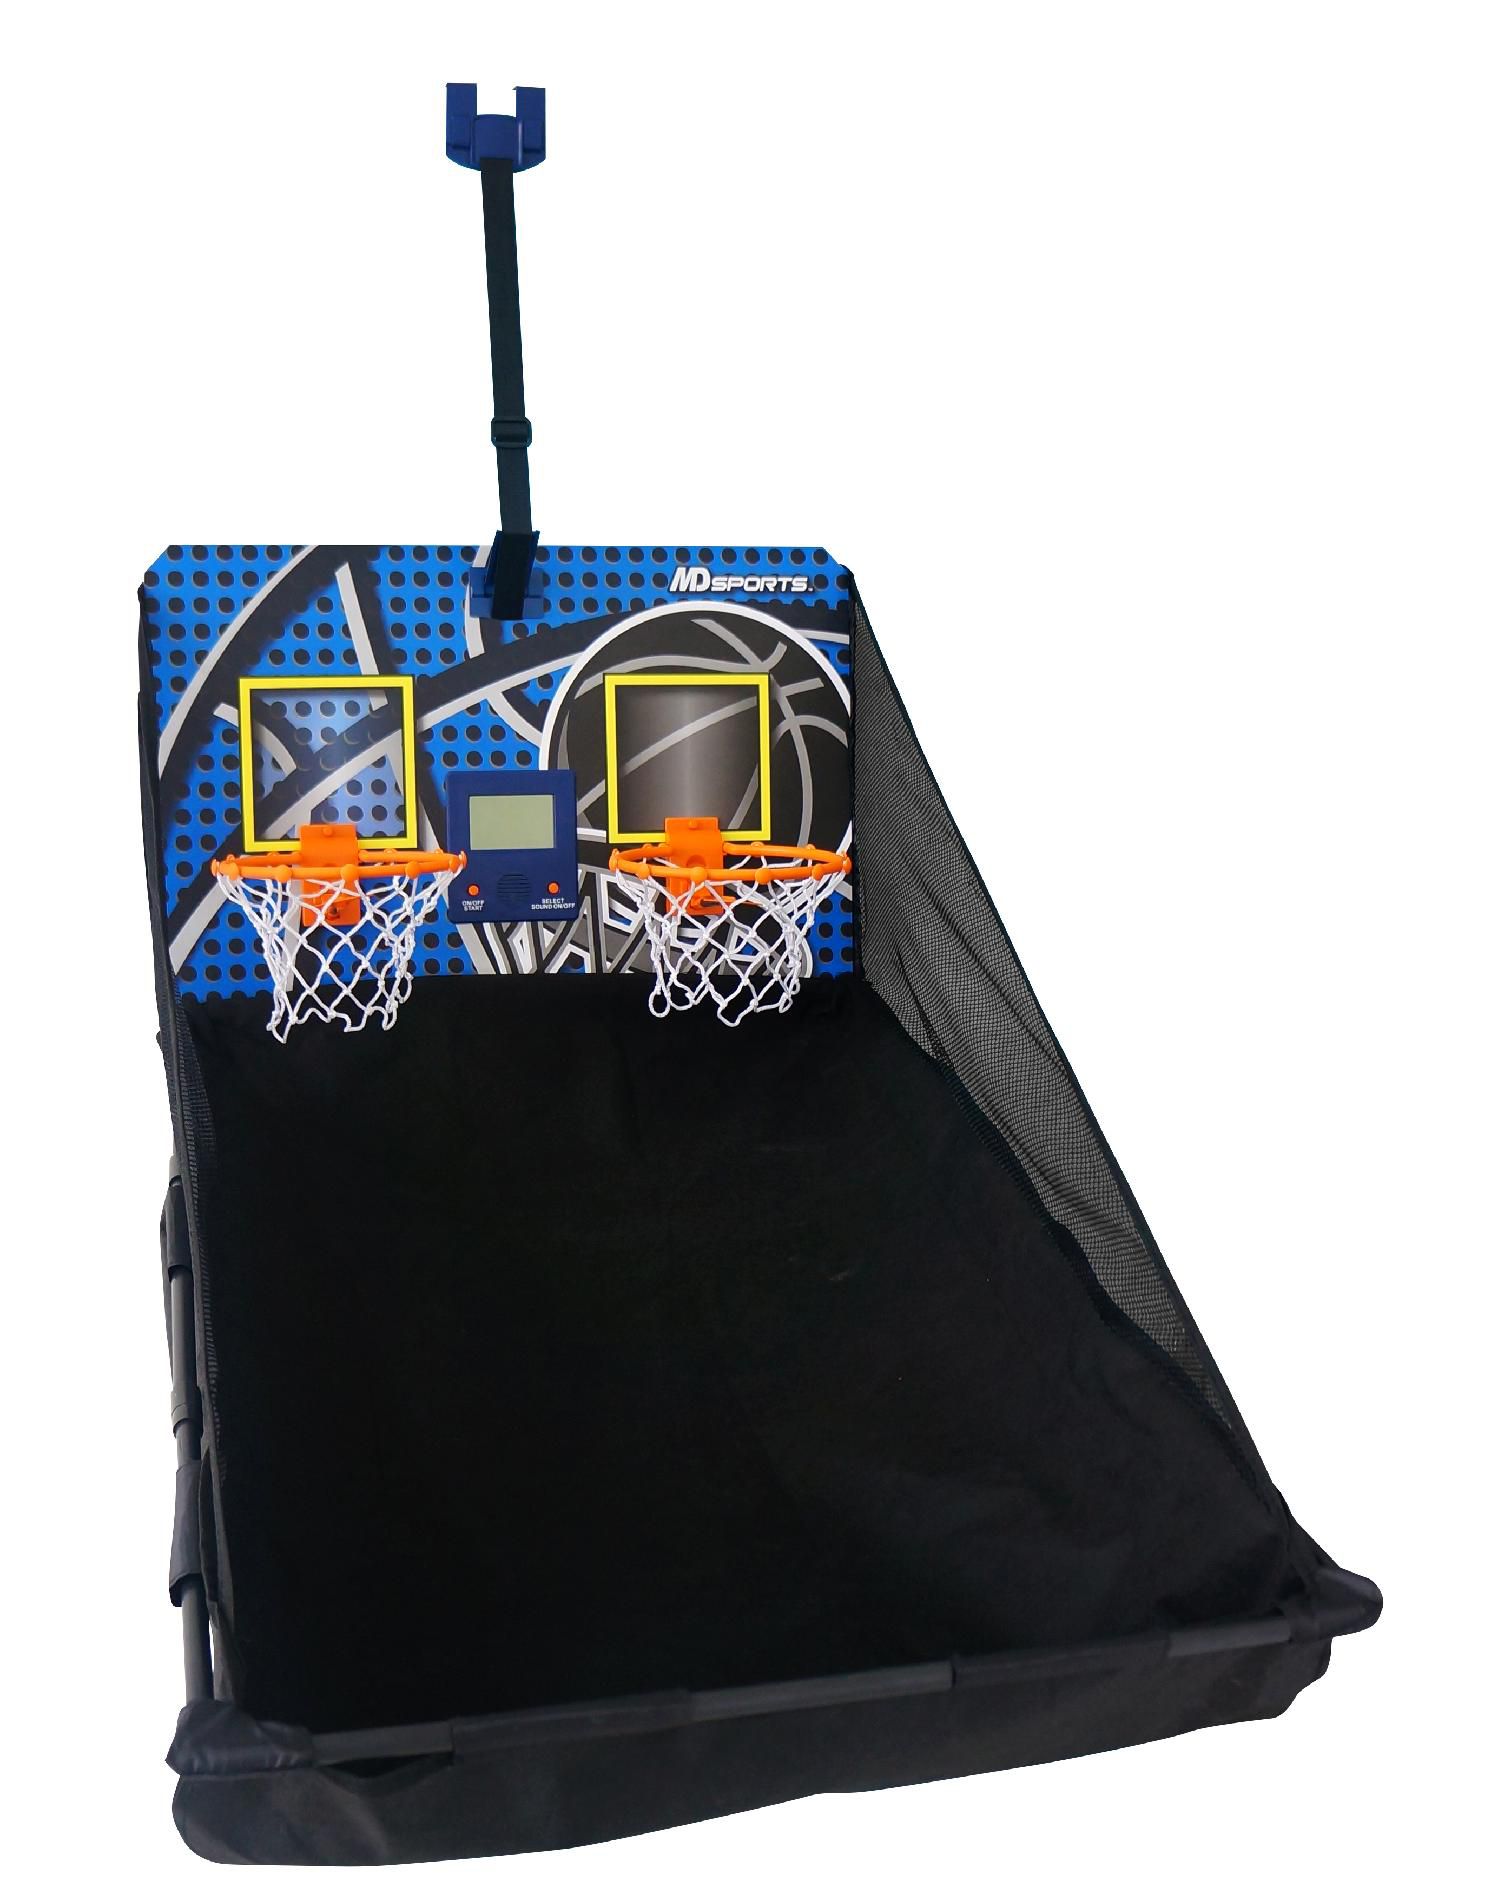 MD Sports Over the Door 2 Player Basketball Set—$19.99!